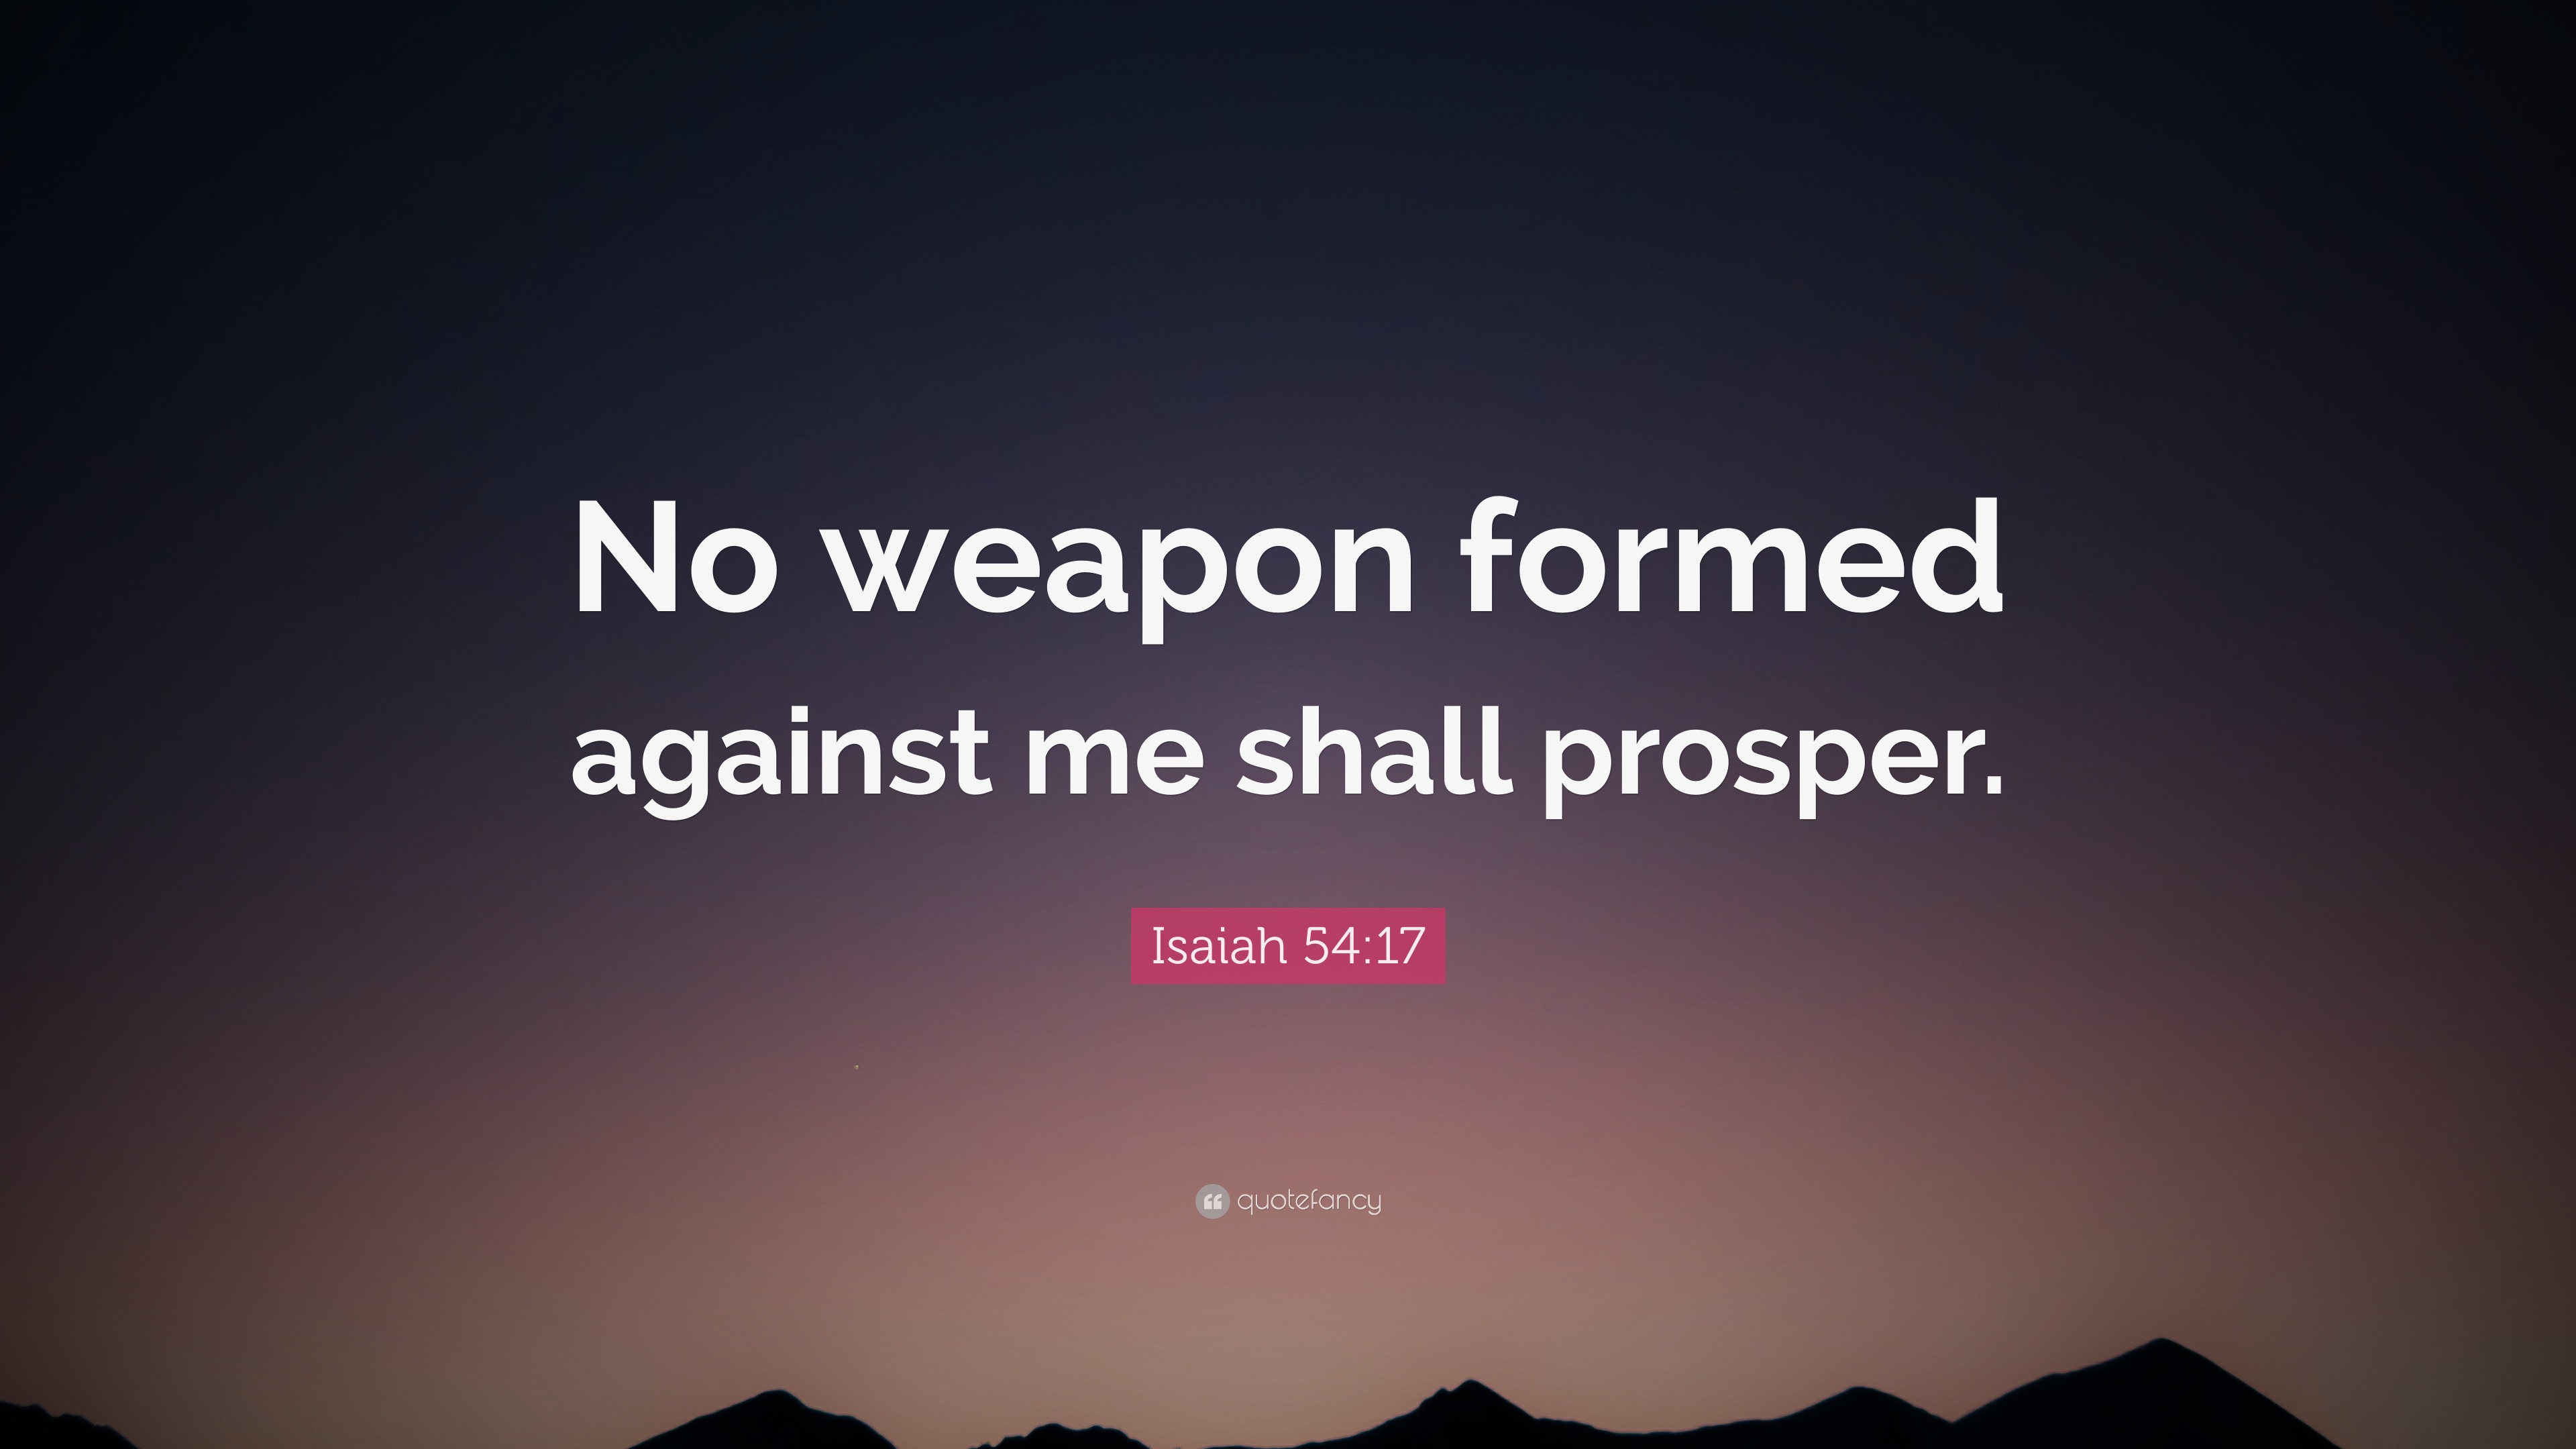 Ray Lewis Quote: “No weapon formed against me shall prosper.” (10